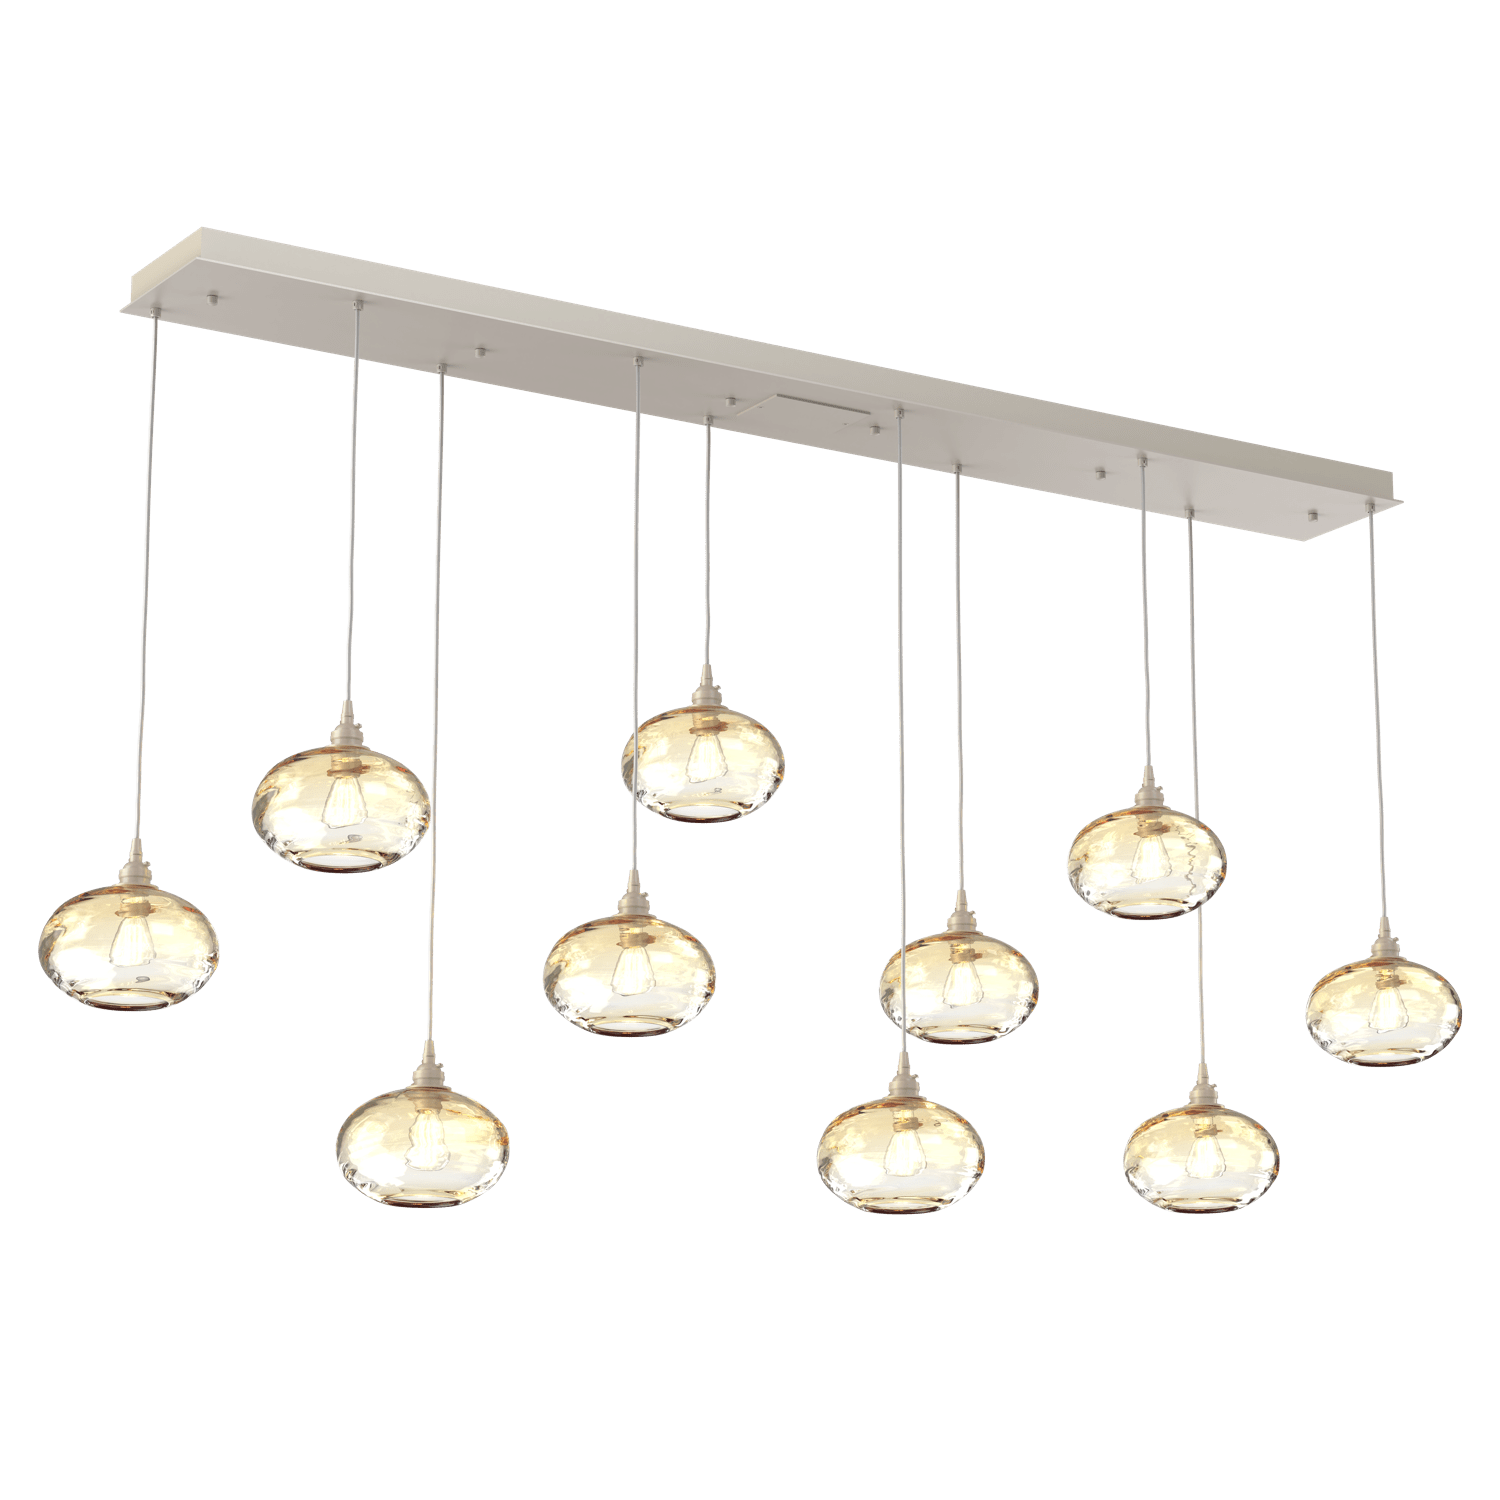 PLB0036-10-BS-OA-Hammerton-Studio-Optic-Blown-Glass-Coppa-10-light-linear-pendant-chandelier-with-metallic-beige-silver-finish-and-optic-amber-blown-glass-shades-and-incandescent-lamping